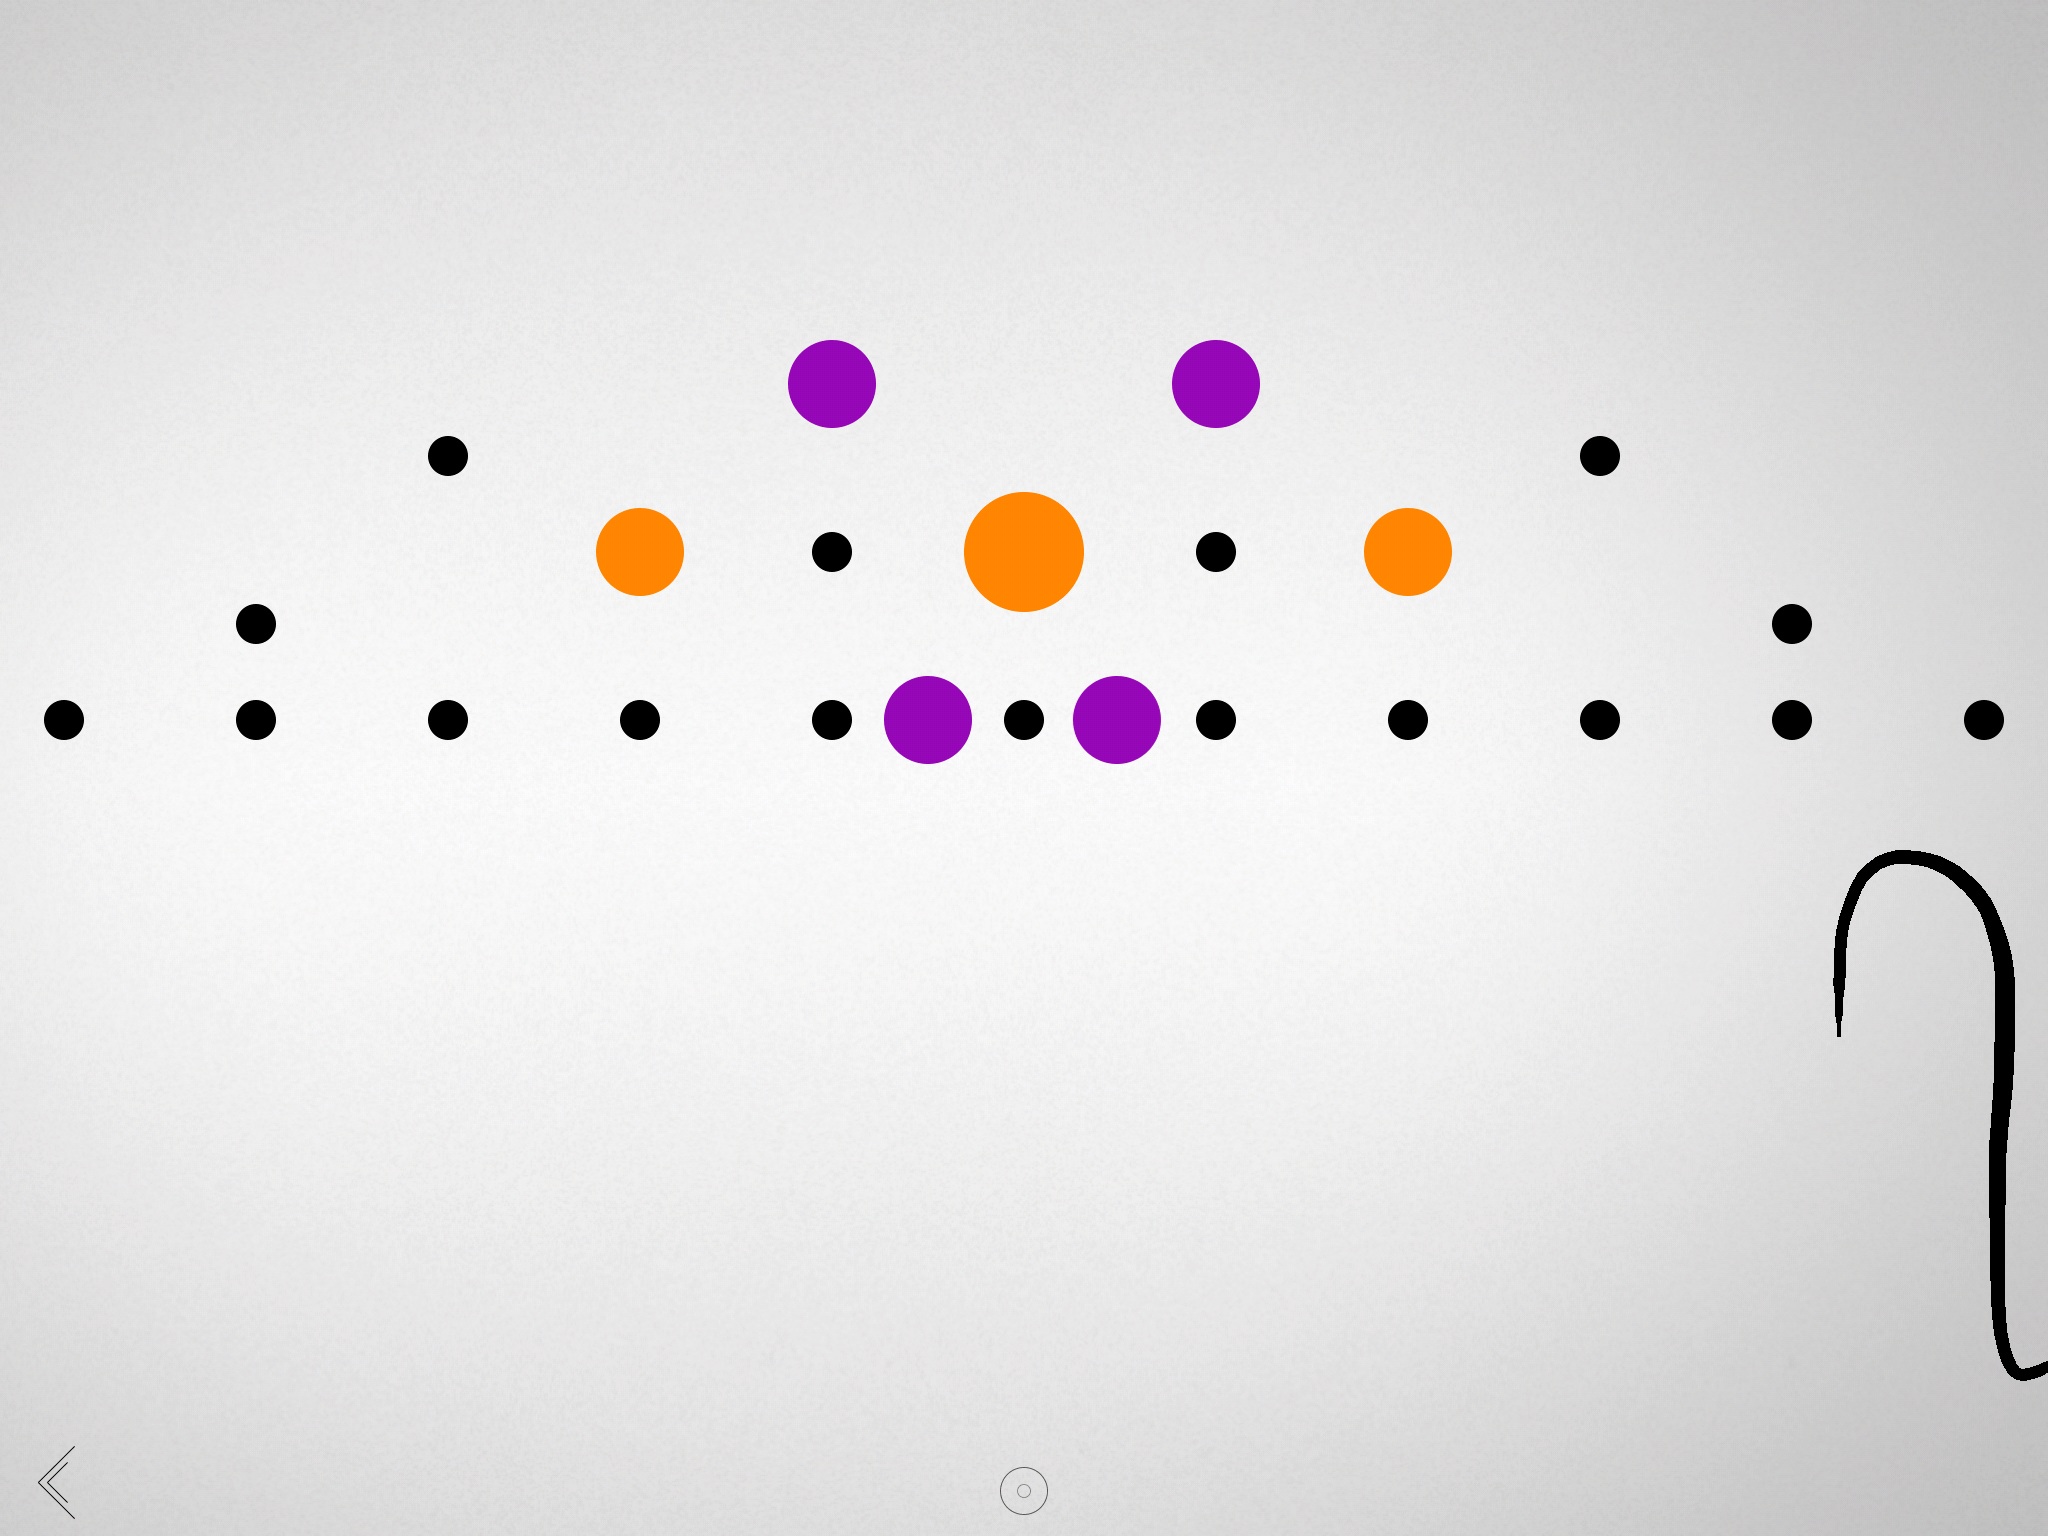 Blek: Top 8 tips, hints, and cheats you need to know!